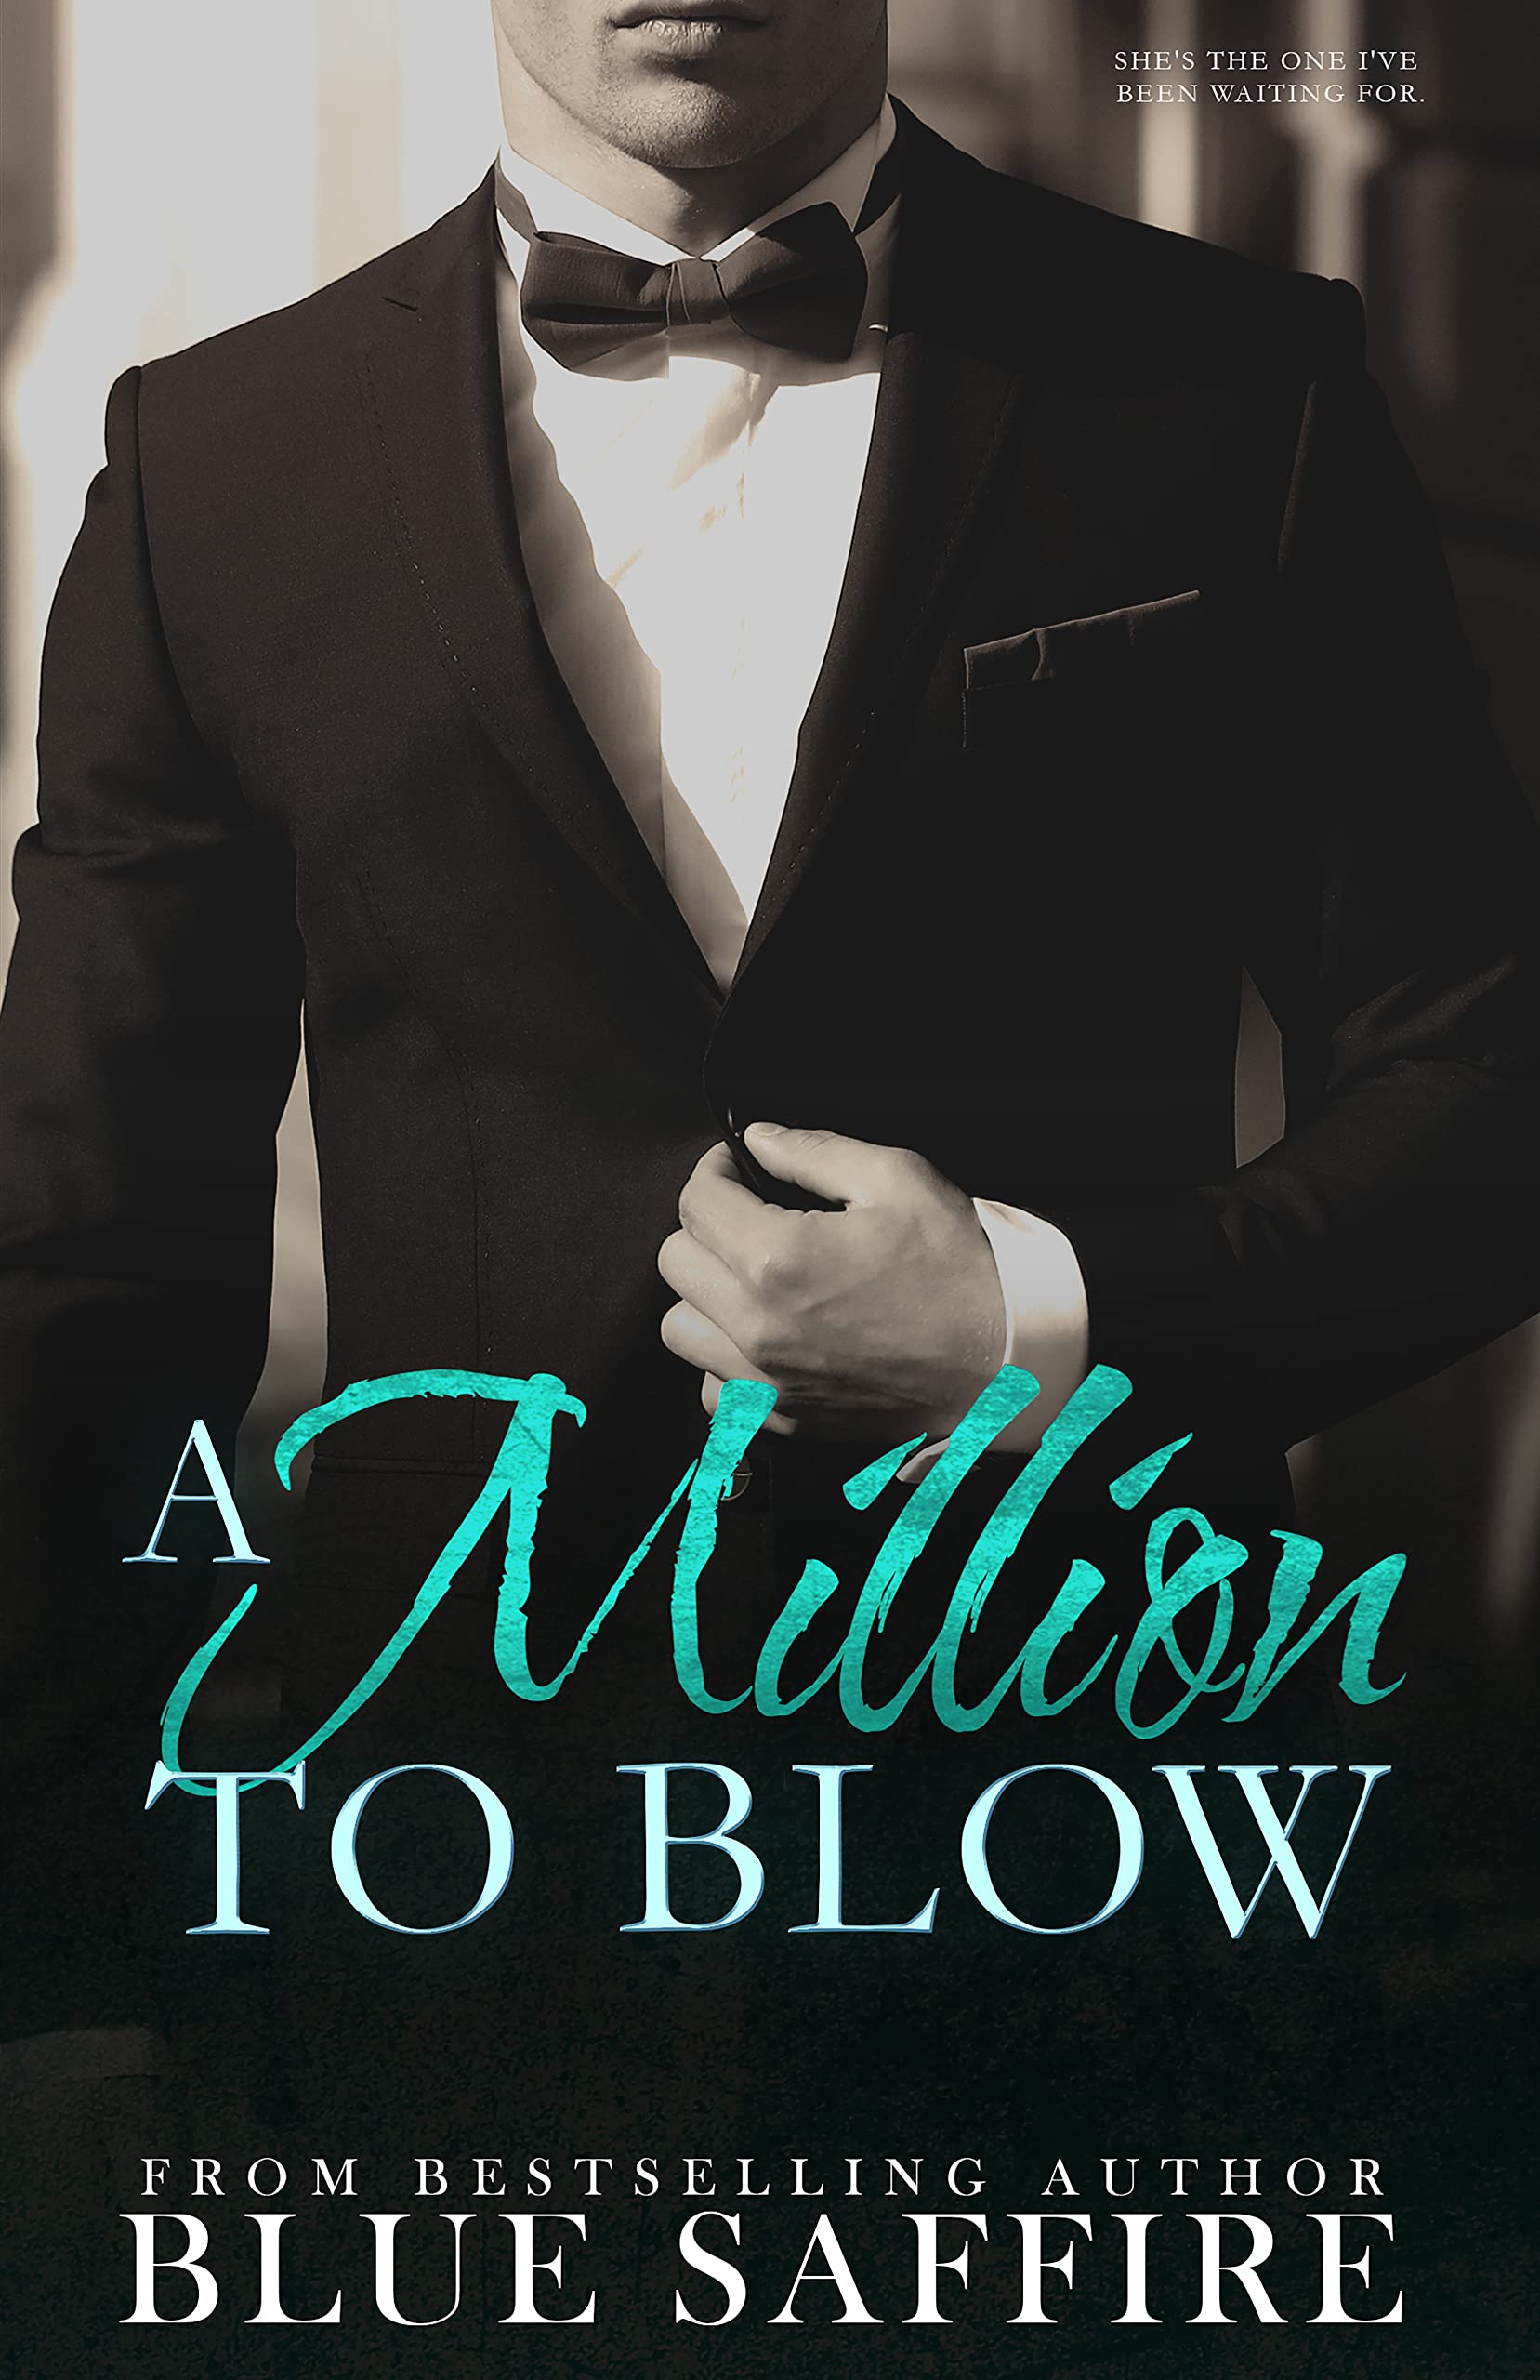 A Million to Blow